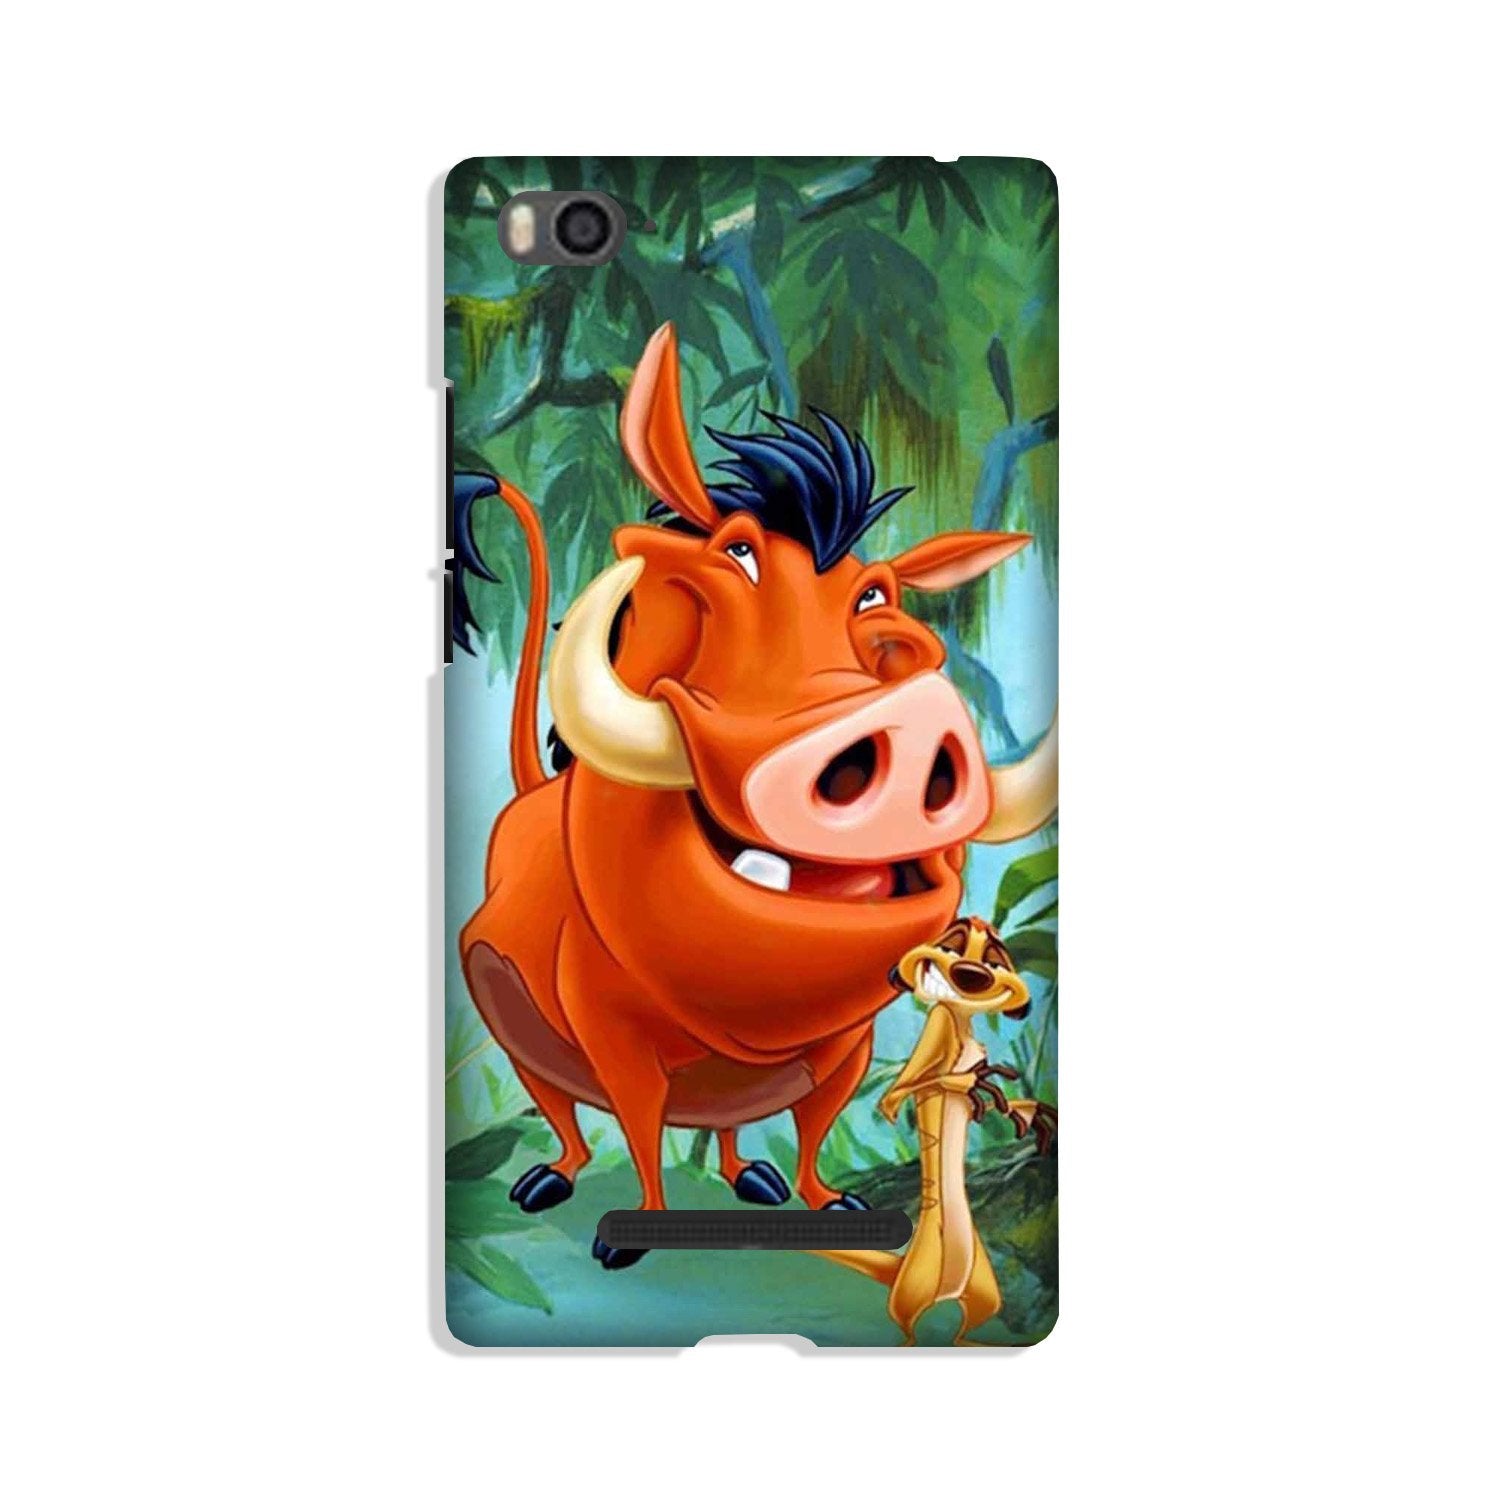 Timon and Pumbaa Mobile Back Case for Xiaomi Mi 4i (Design - 305)